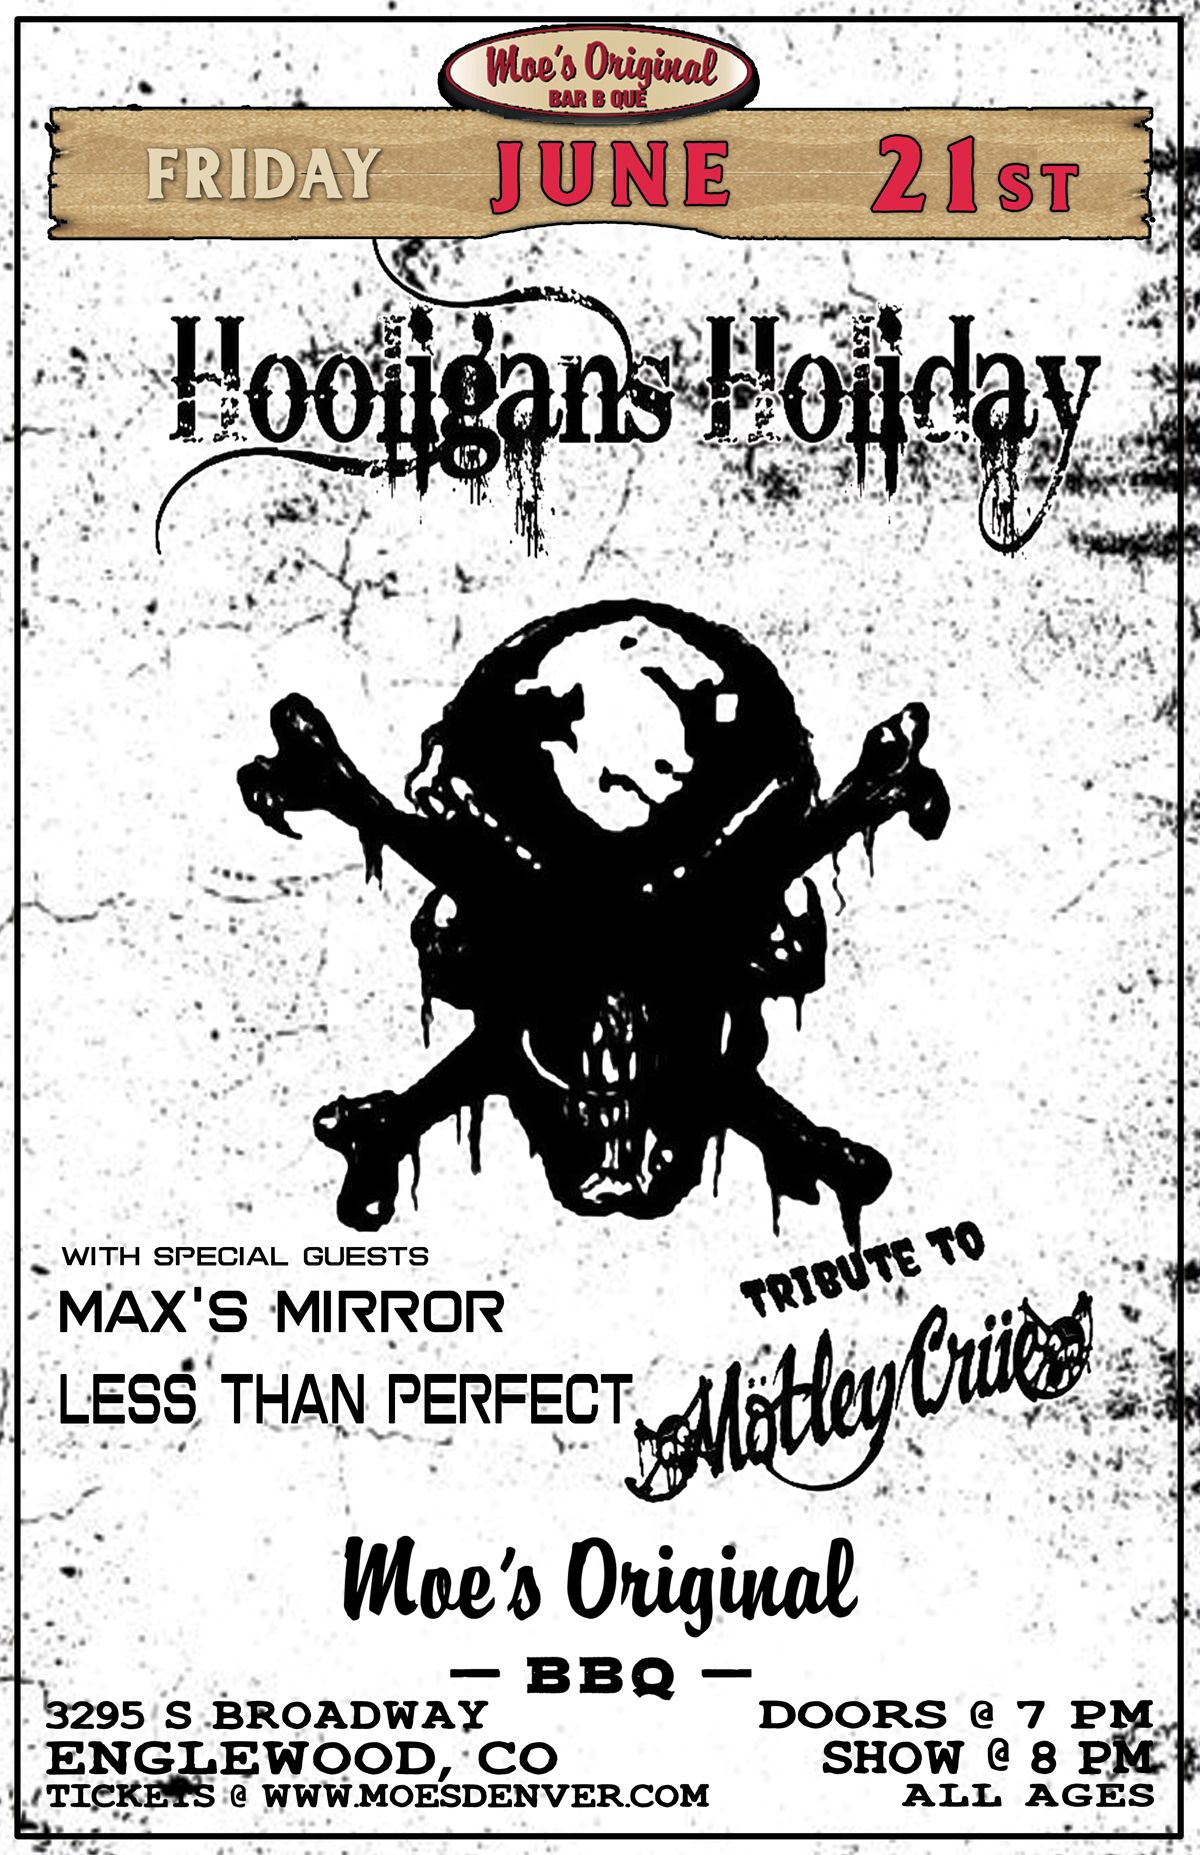 FRIDAY! Hooligan's Holiday (Motley Crue tribute) w\/ Max's Mirror +Less Than Perfect